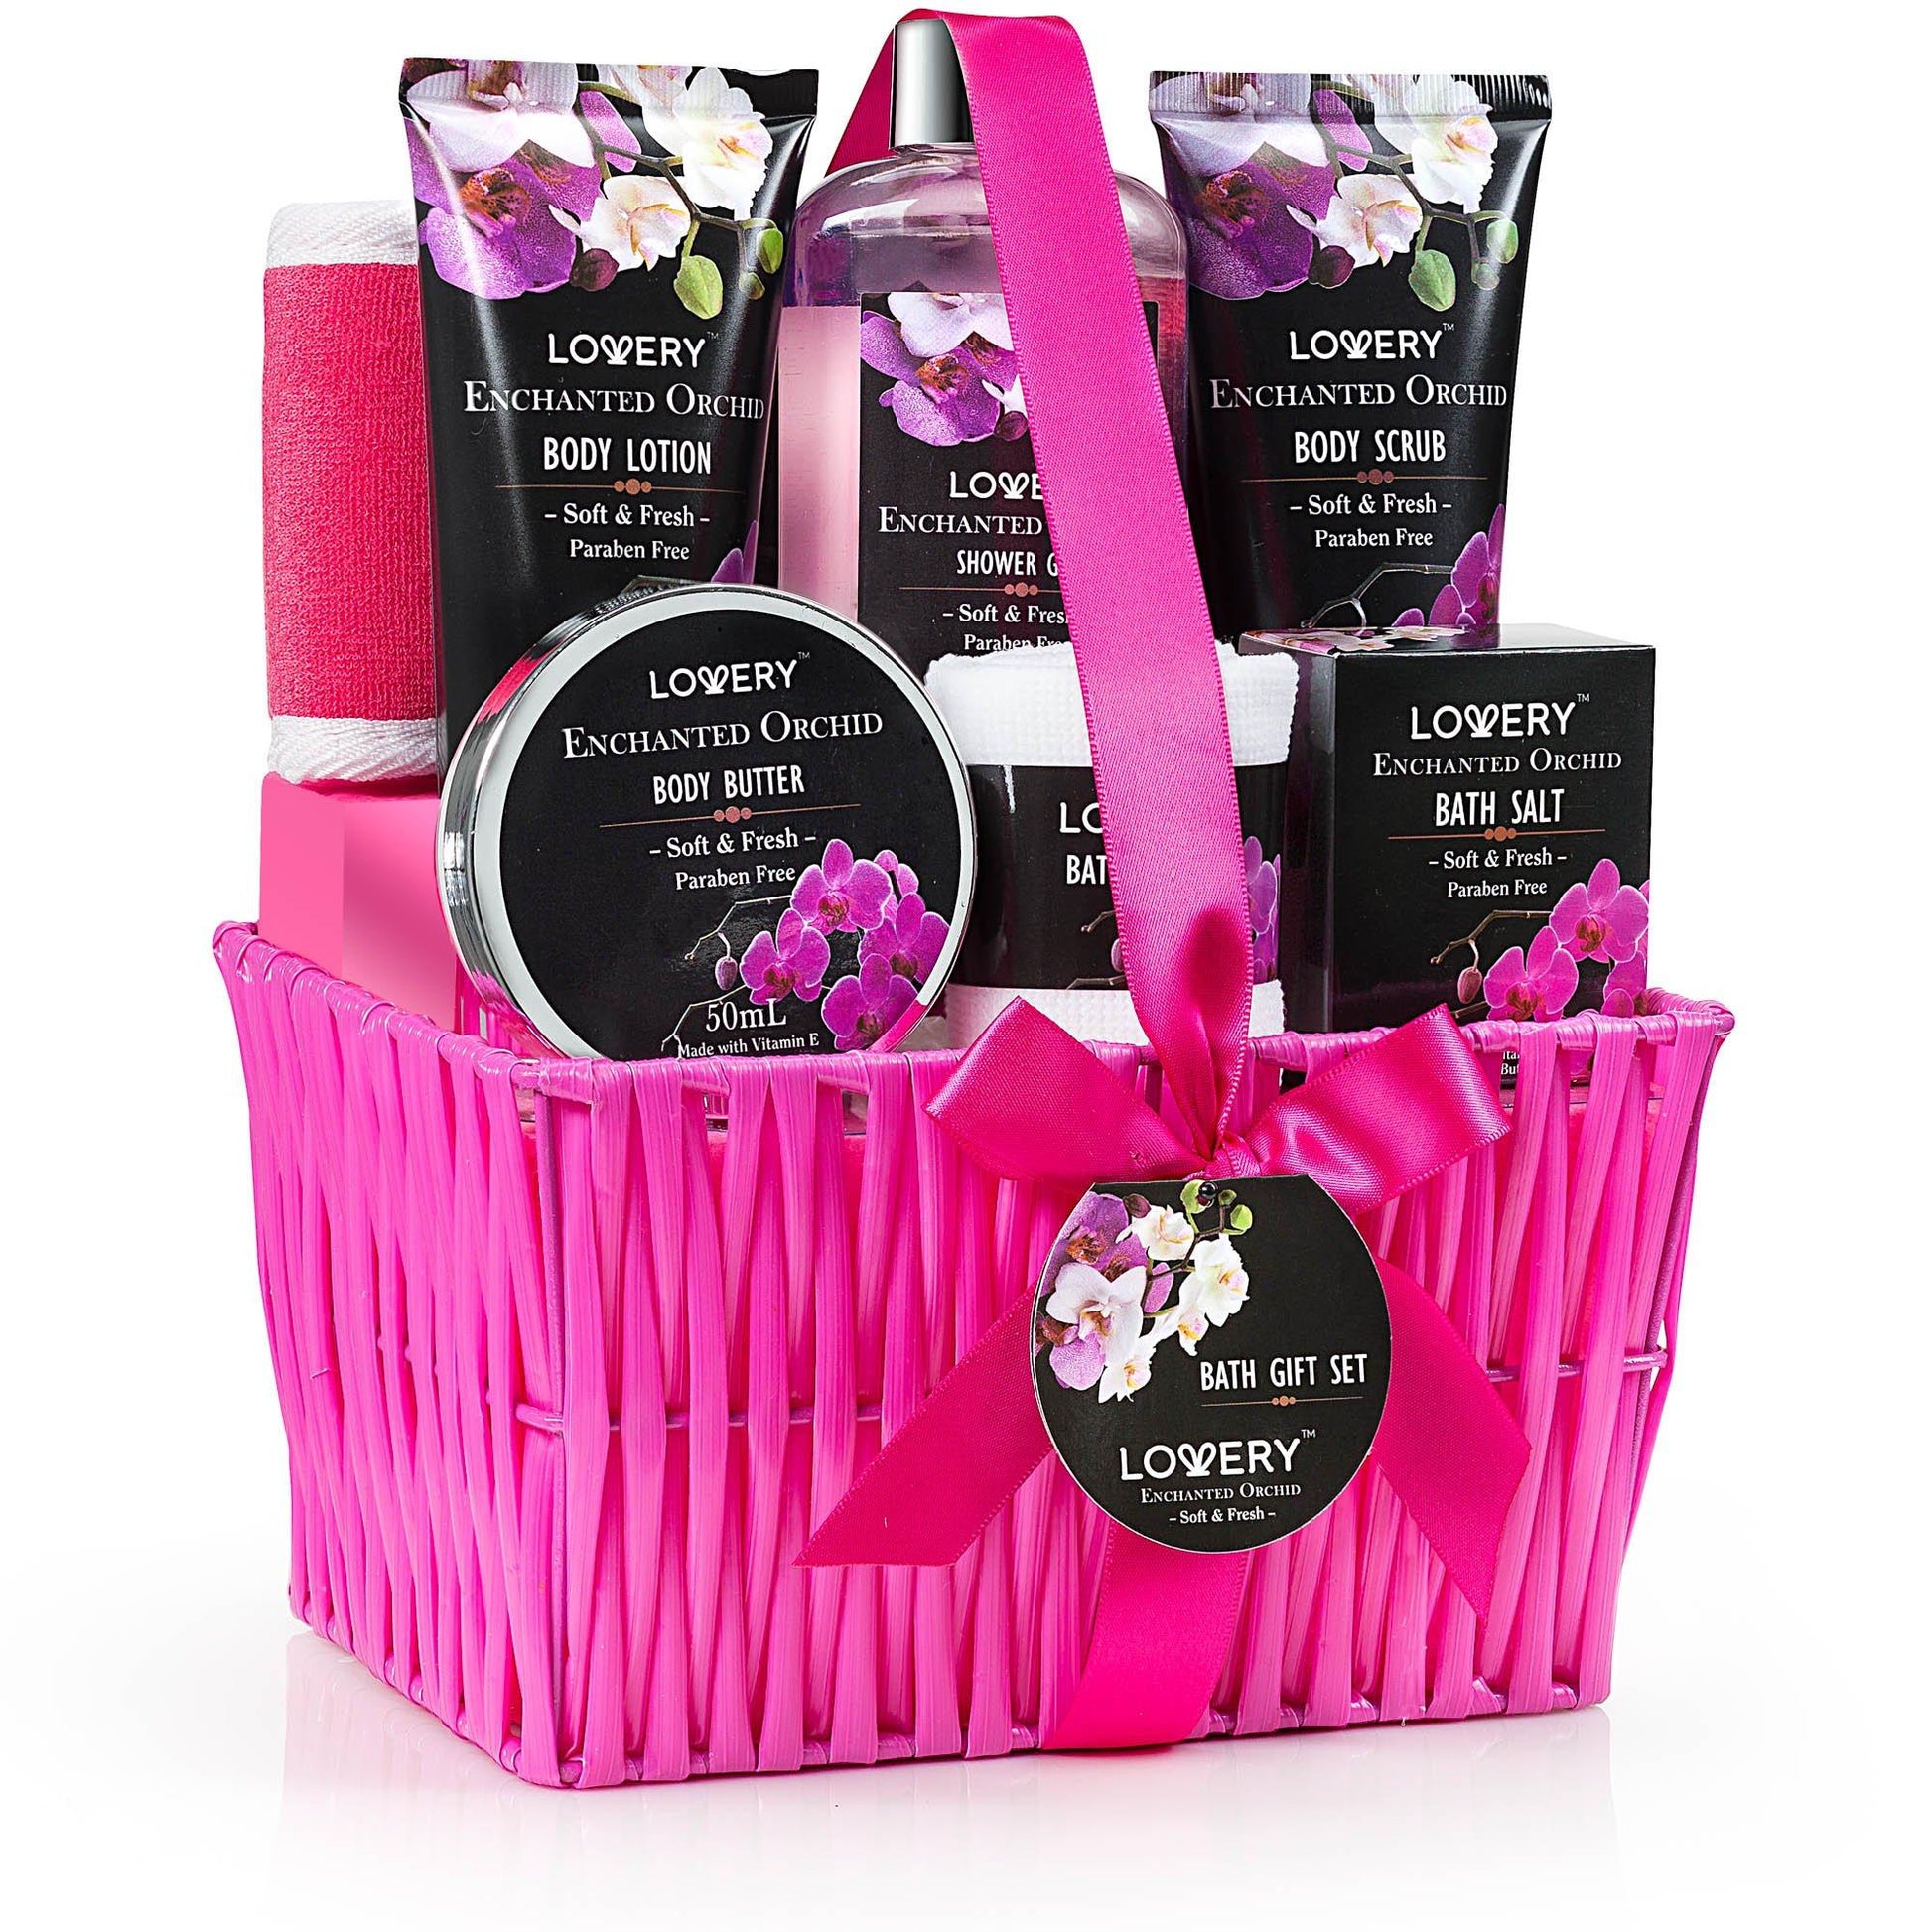 Enchanted Orchid Spa Bath & Body Gift Set - Lovery